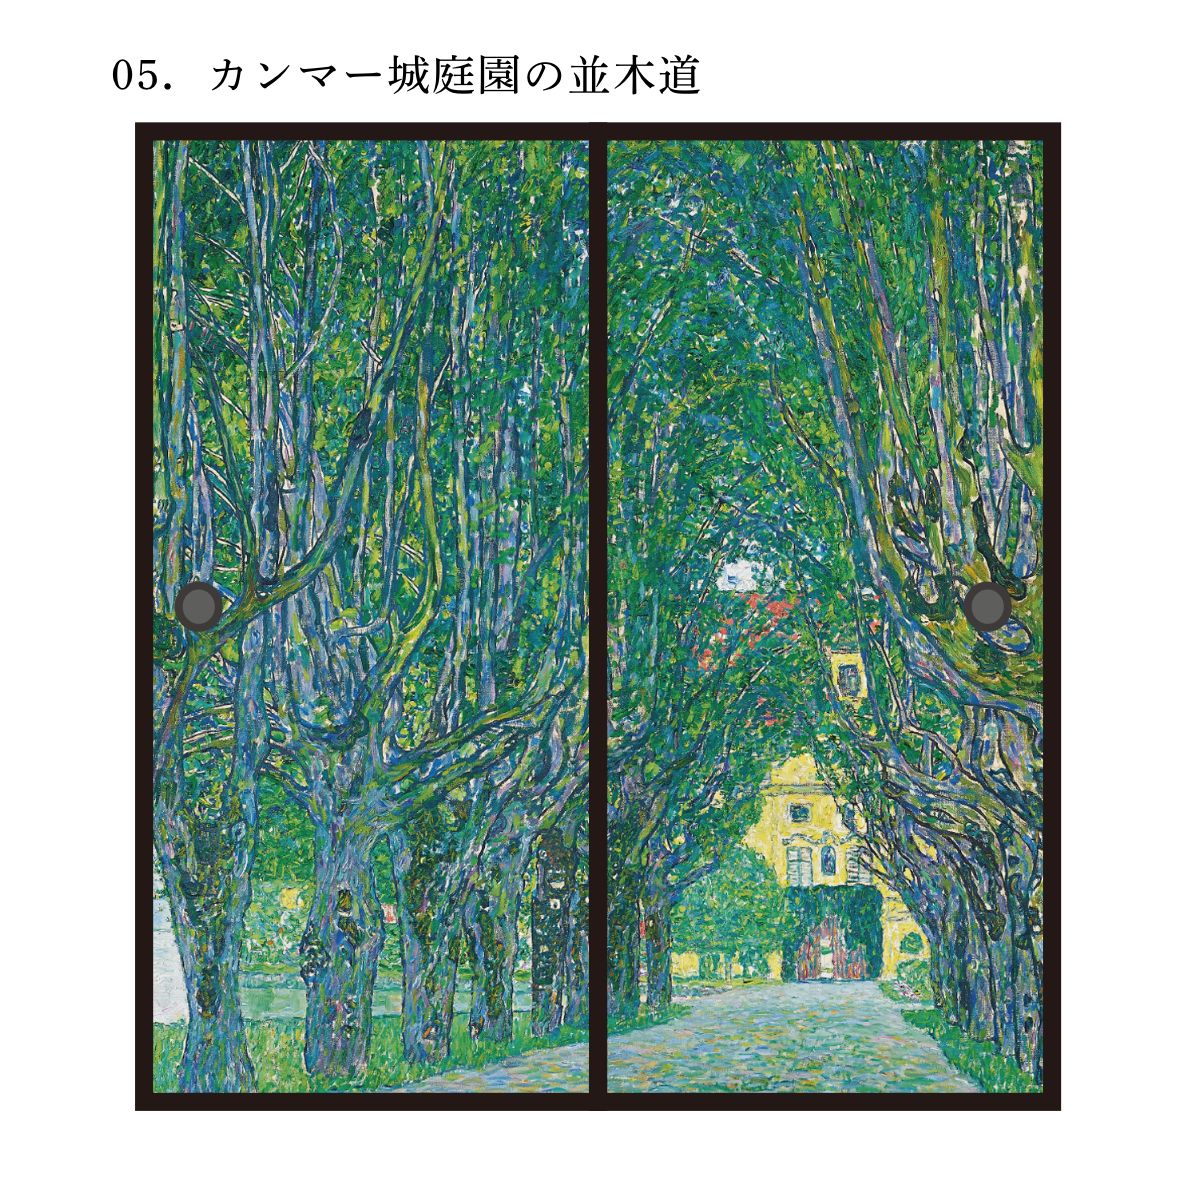 World Famous Painting Fusuma Paper Gustav Klimt Tree-lined Avenue in the Kammer Castle Garden Set of 2 Adhesive type with water Width 91cm x Length 182cm Fusuma Paper Asahipen WWA-005F